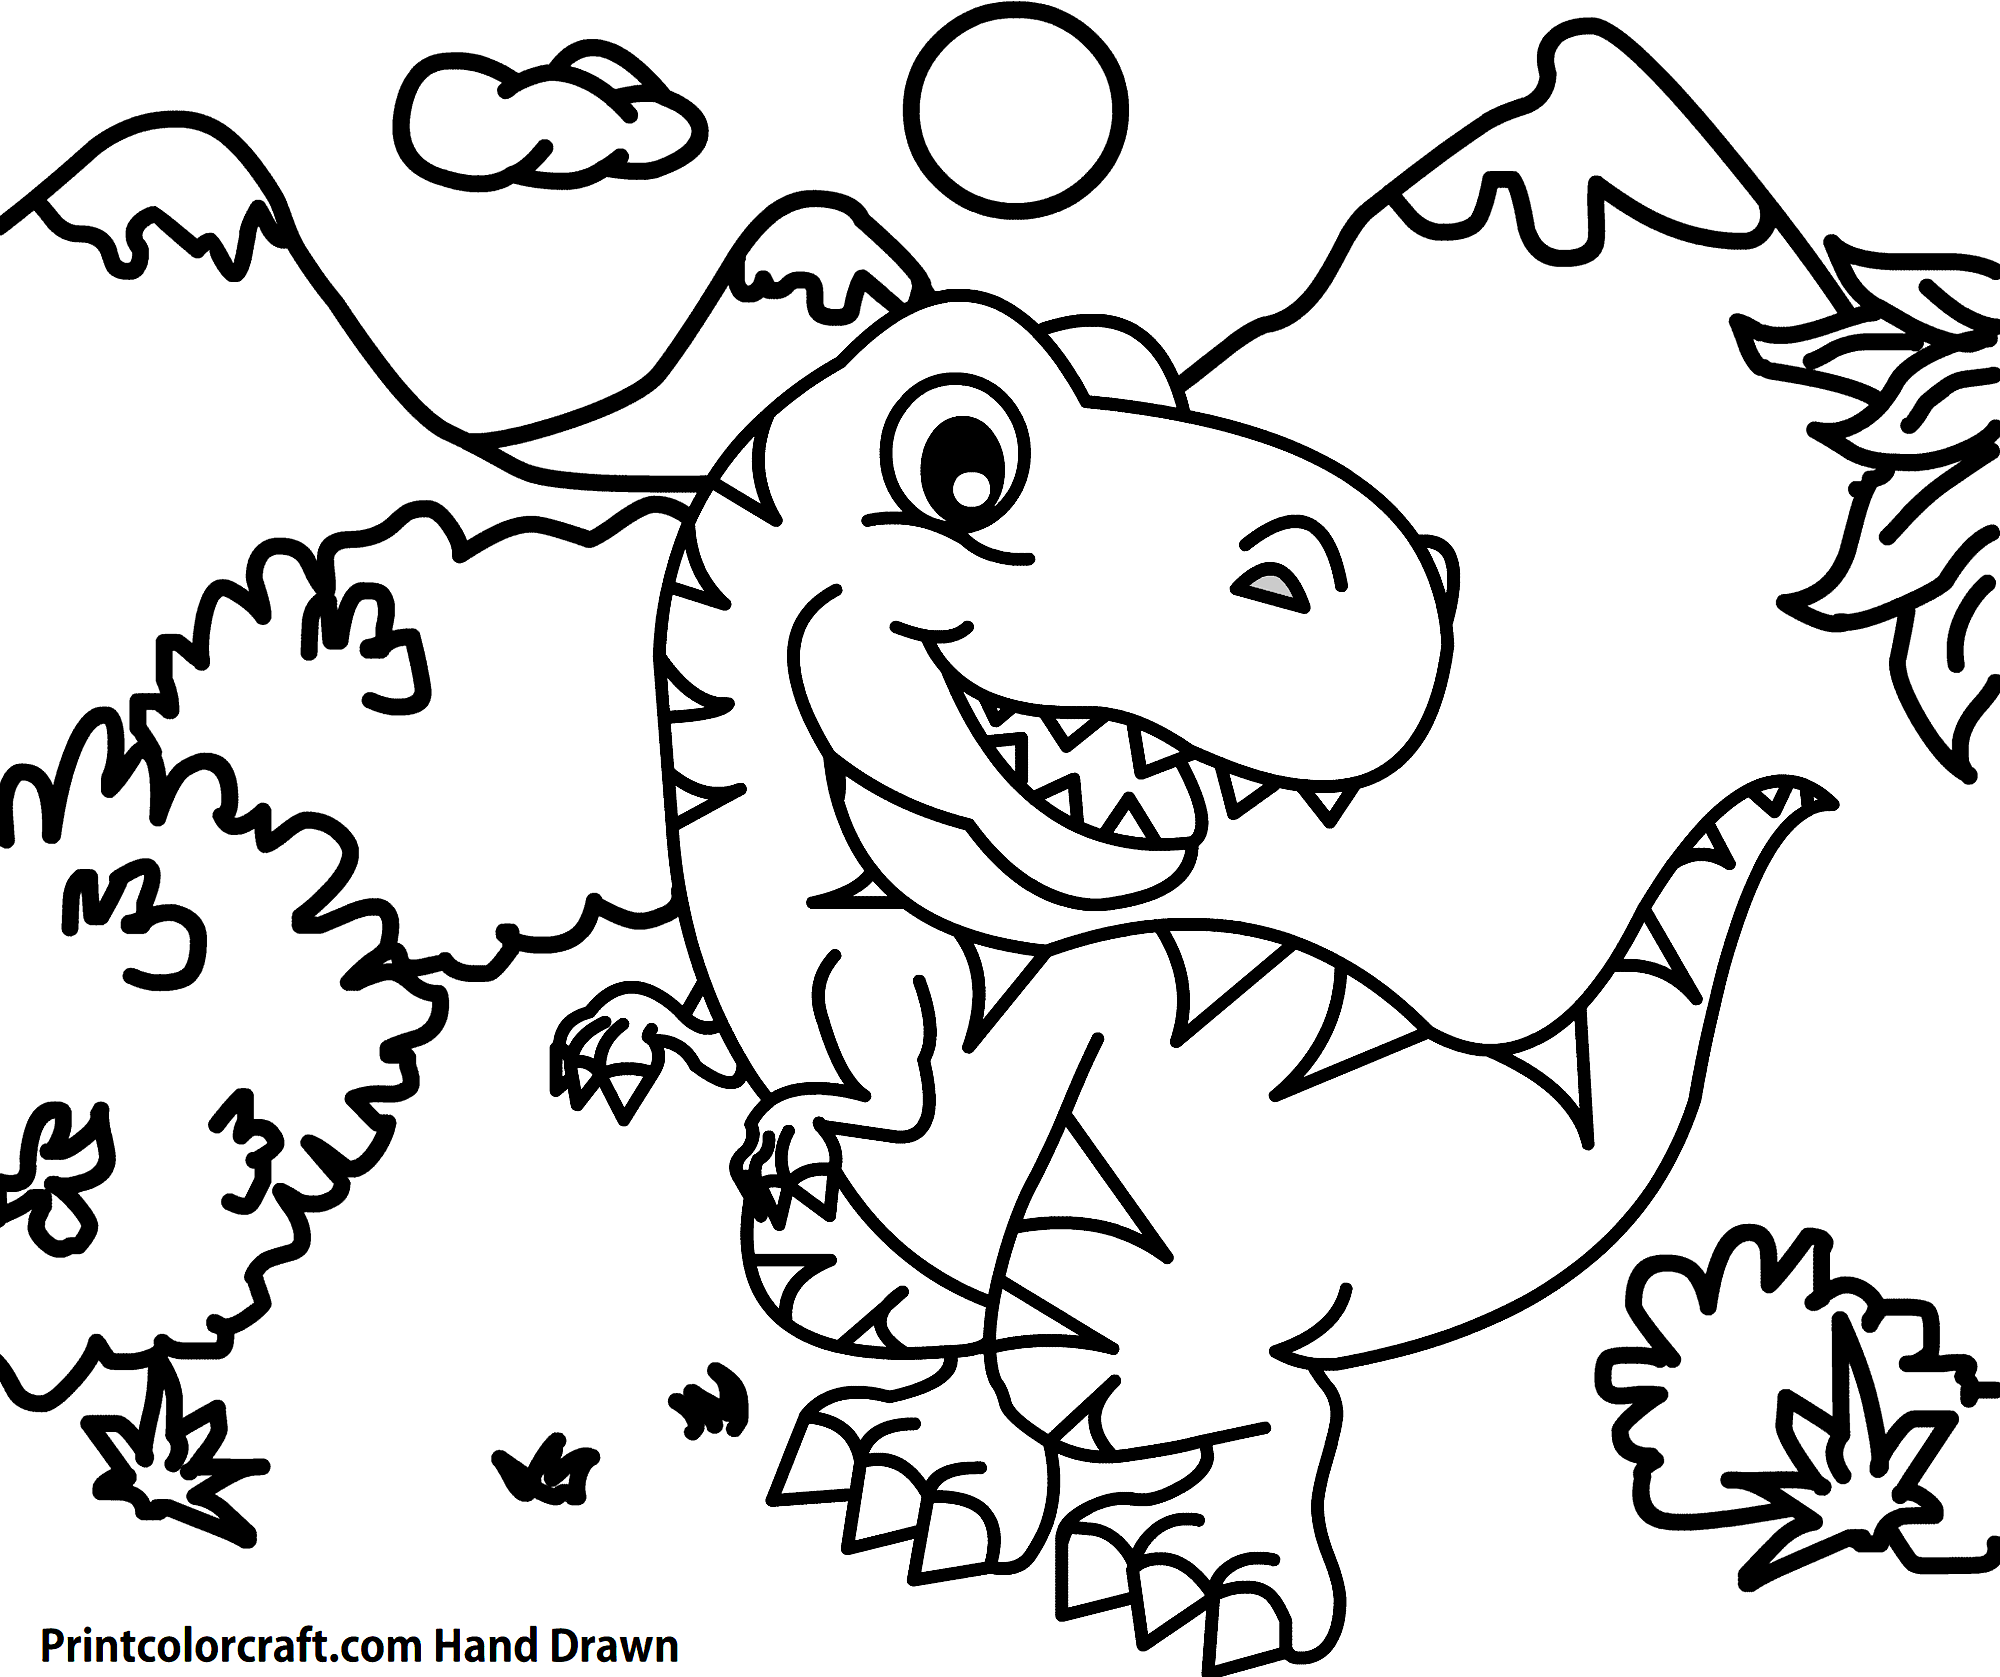 Dinosaur Coloring Pages (Updated): Printable PDF Print Color Craft